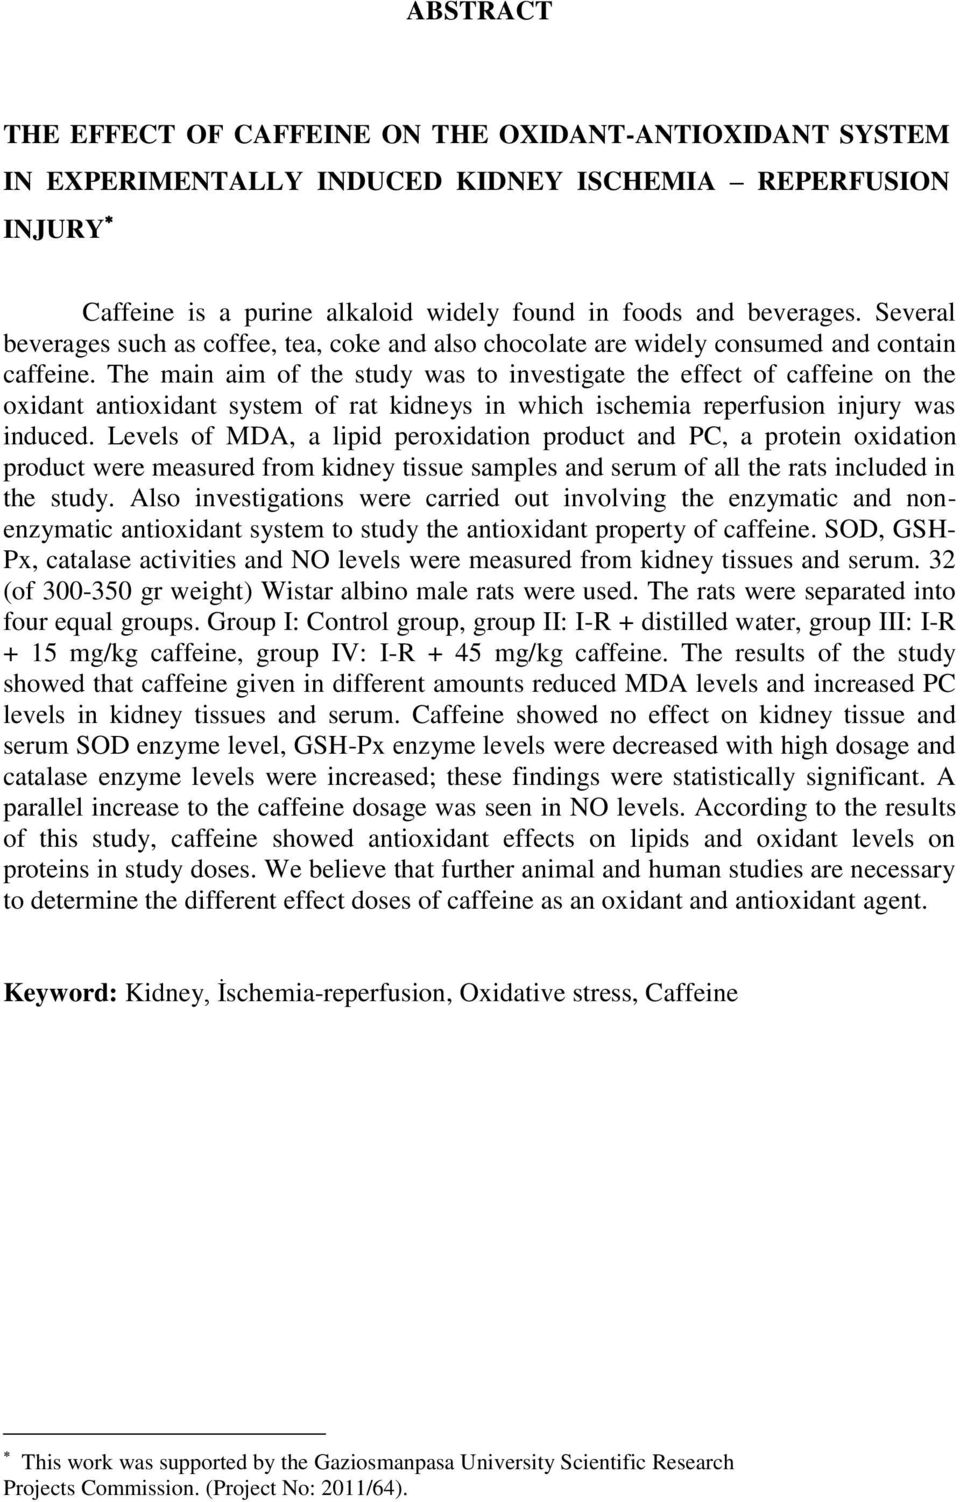 The main aim of the study was to investigate the effect of caffeine on the oxidant antioxidant system of rat kidneys in which ischemia reperfusion injury was induced.